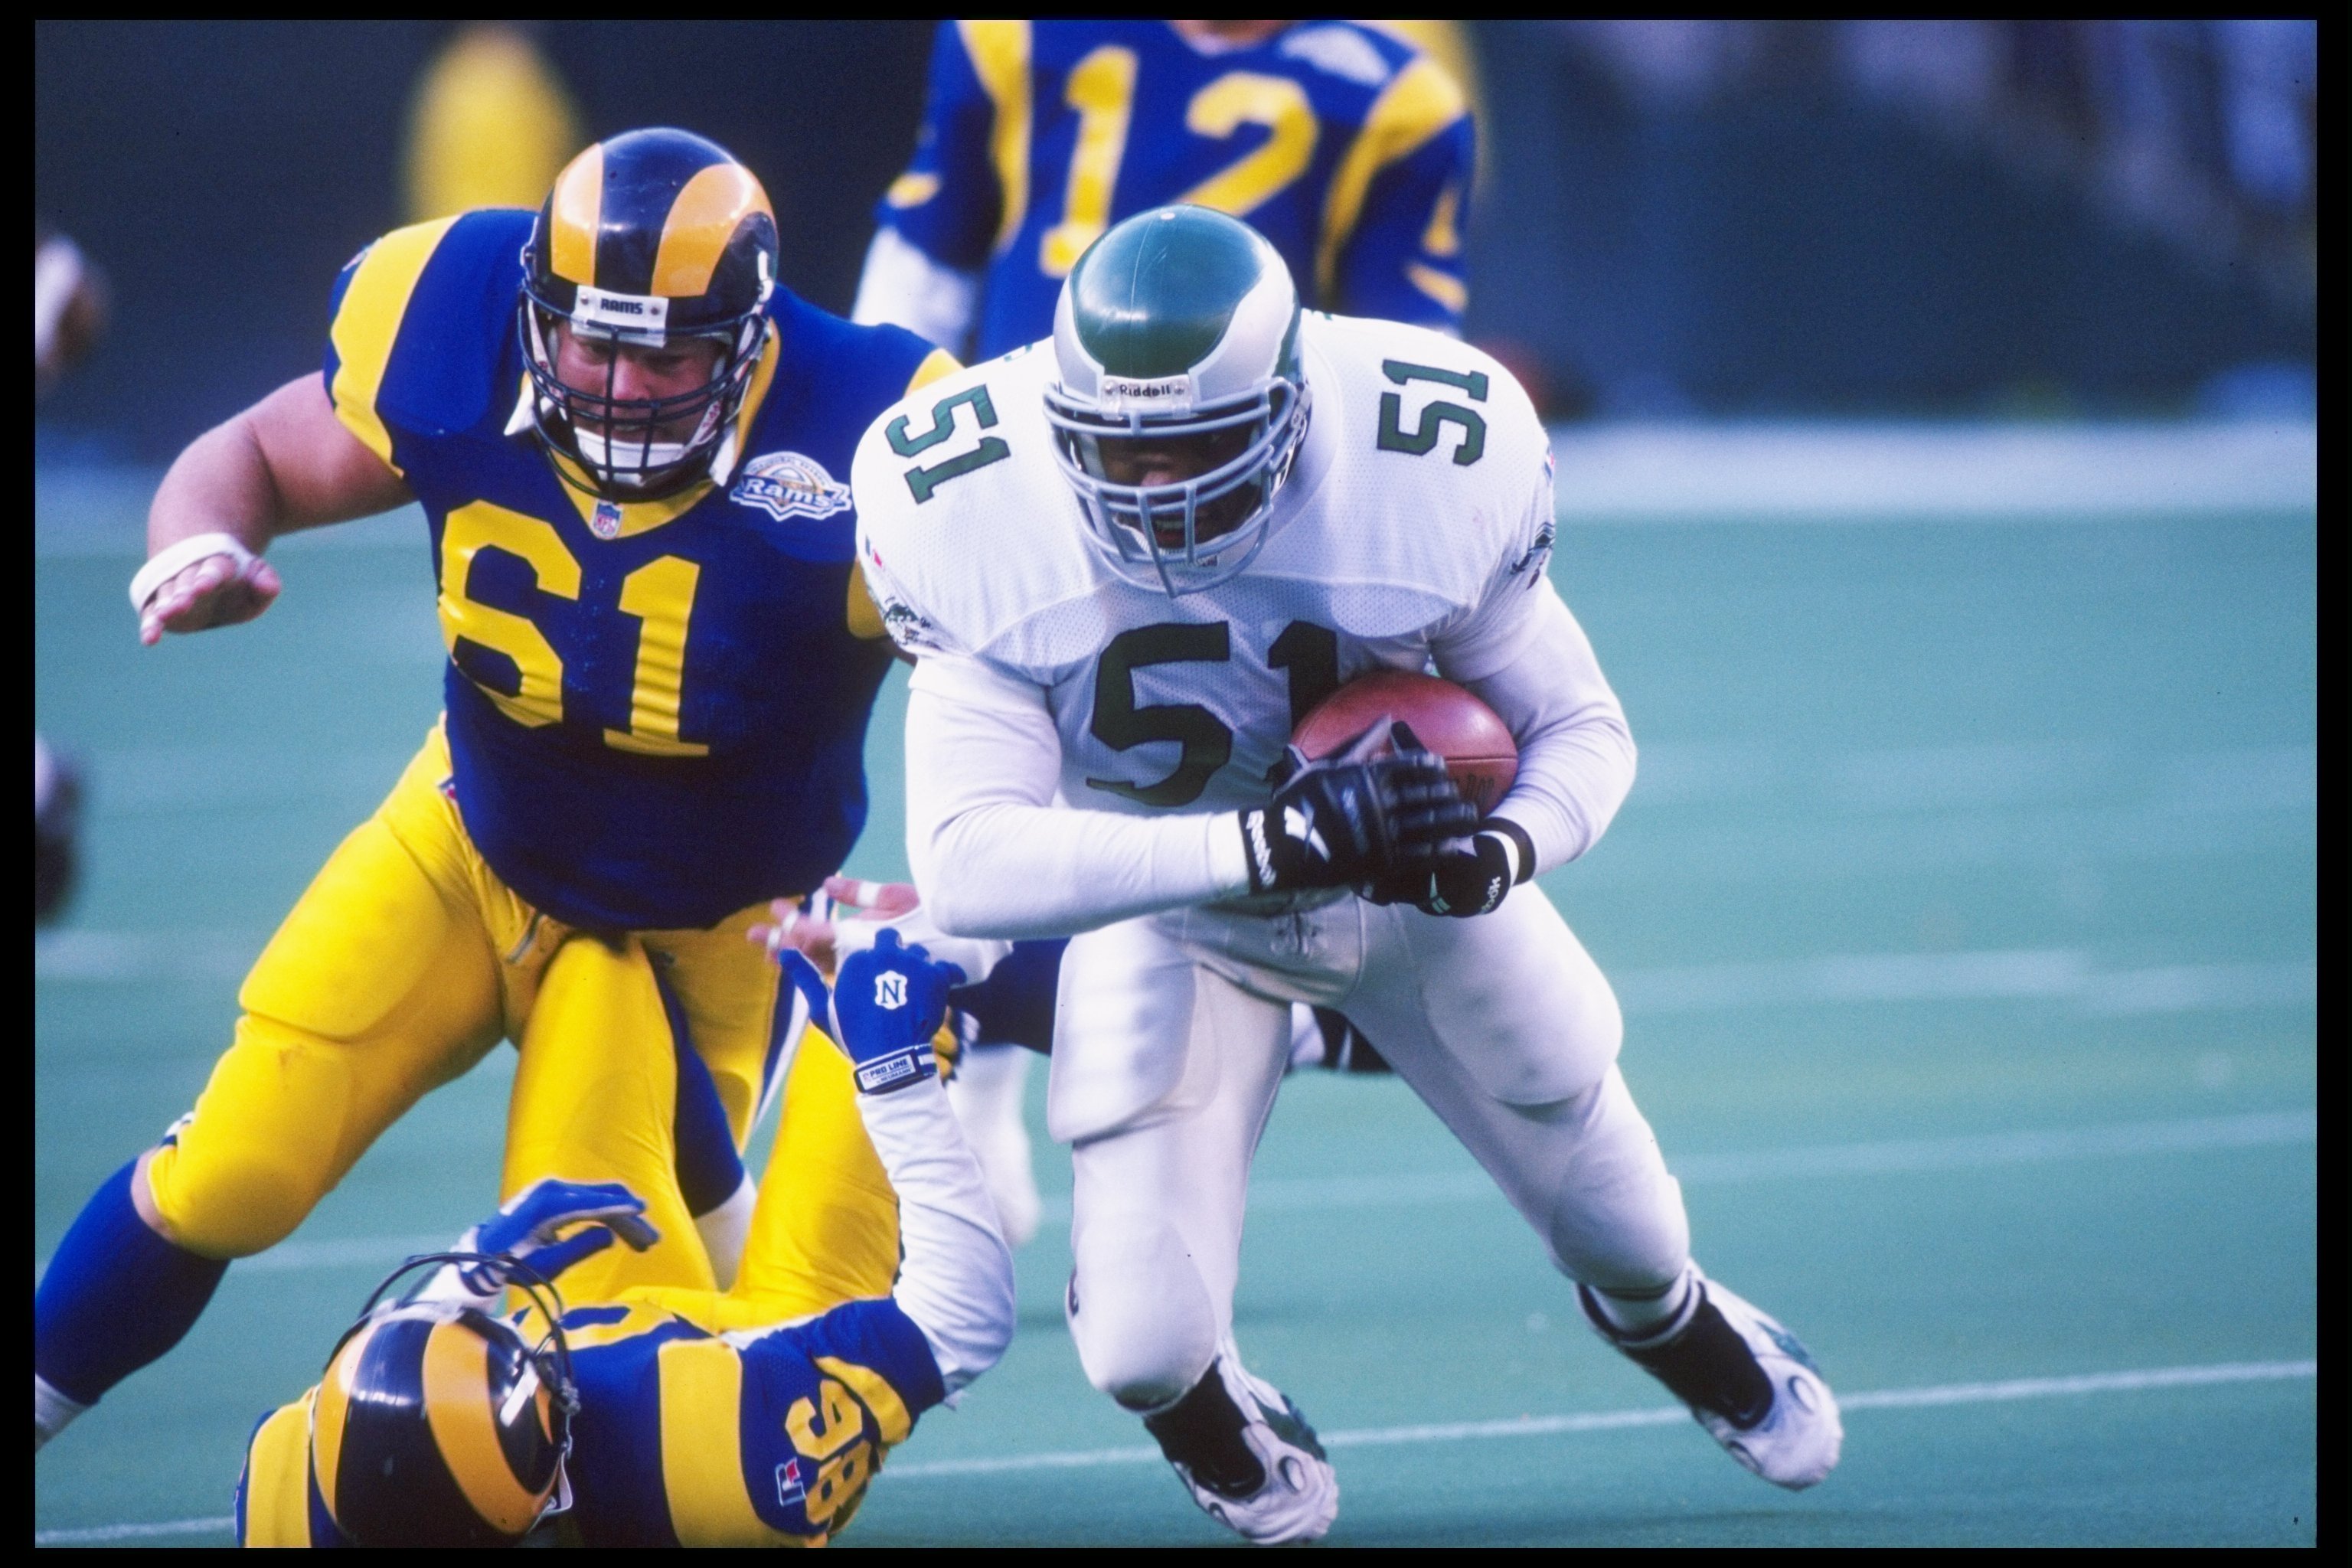 29 Oct 1995: Linebacker William Thomas of the Philadelphia Eagles tries to break away from guard Bern Brostek and tight end Jessie Hester of the St. Louis Rams during a game at Veterans Stadium in Philadelphia, Pennsylvania. The Eagles won the game 20-9.